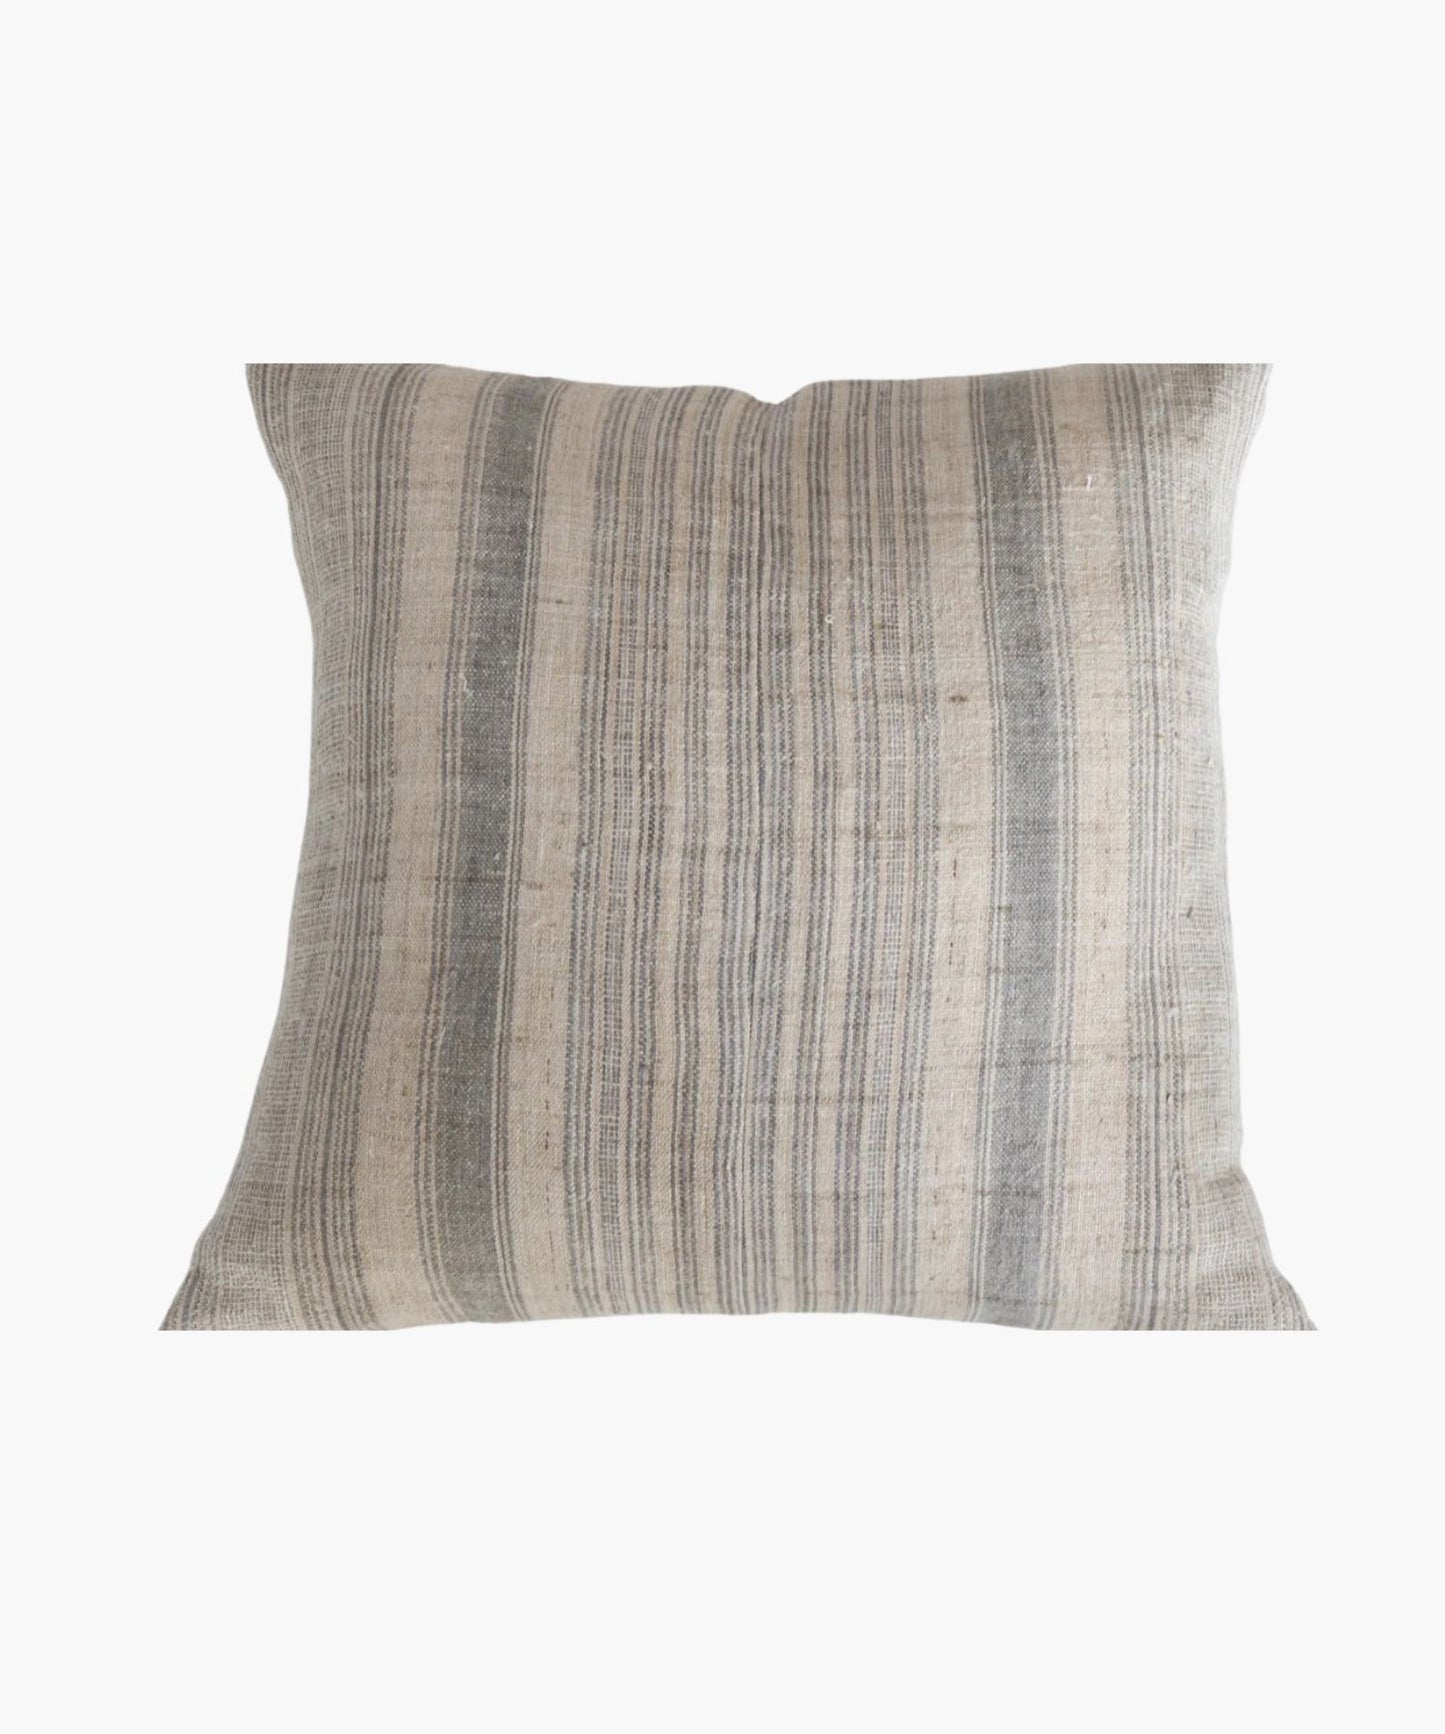 Ivy Pillow Cover, Gray